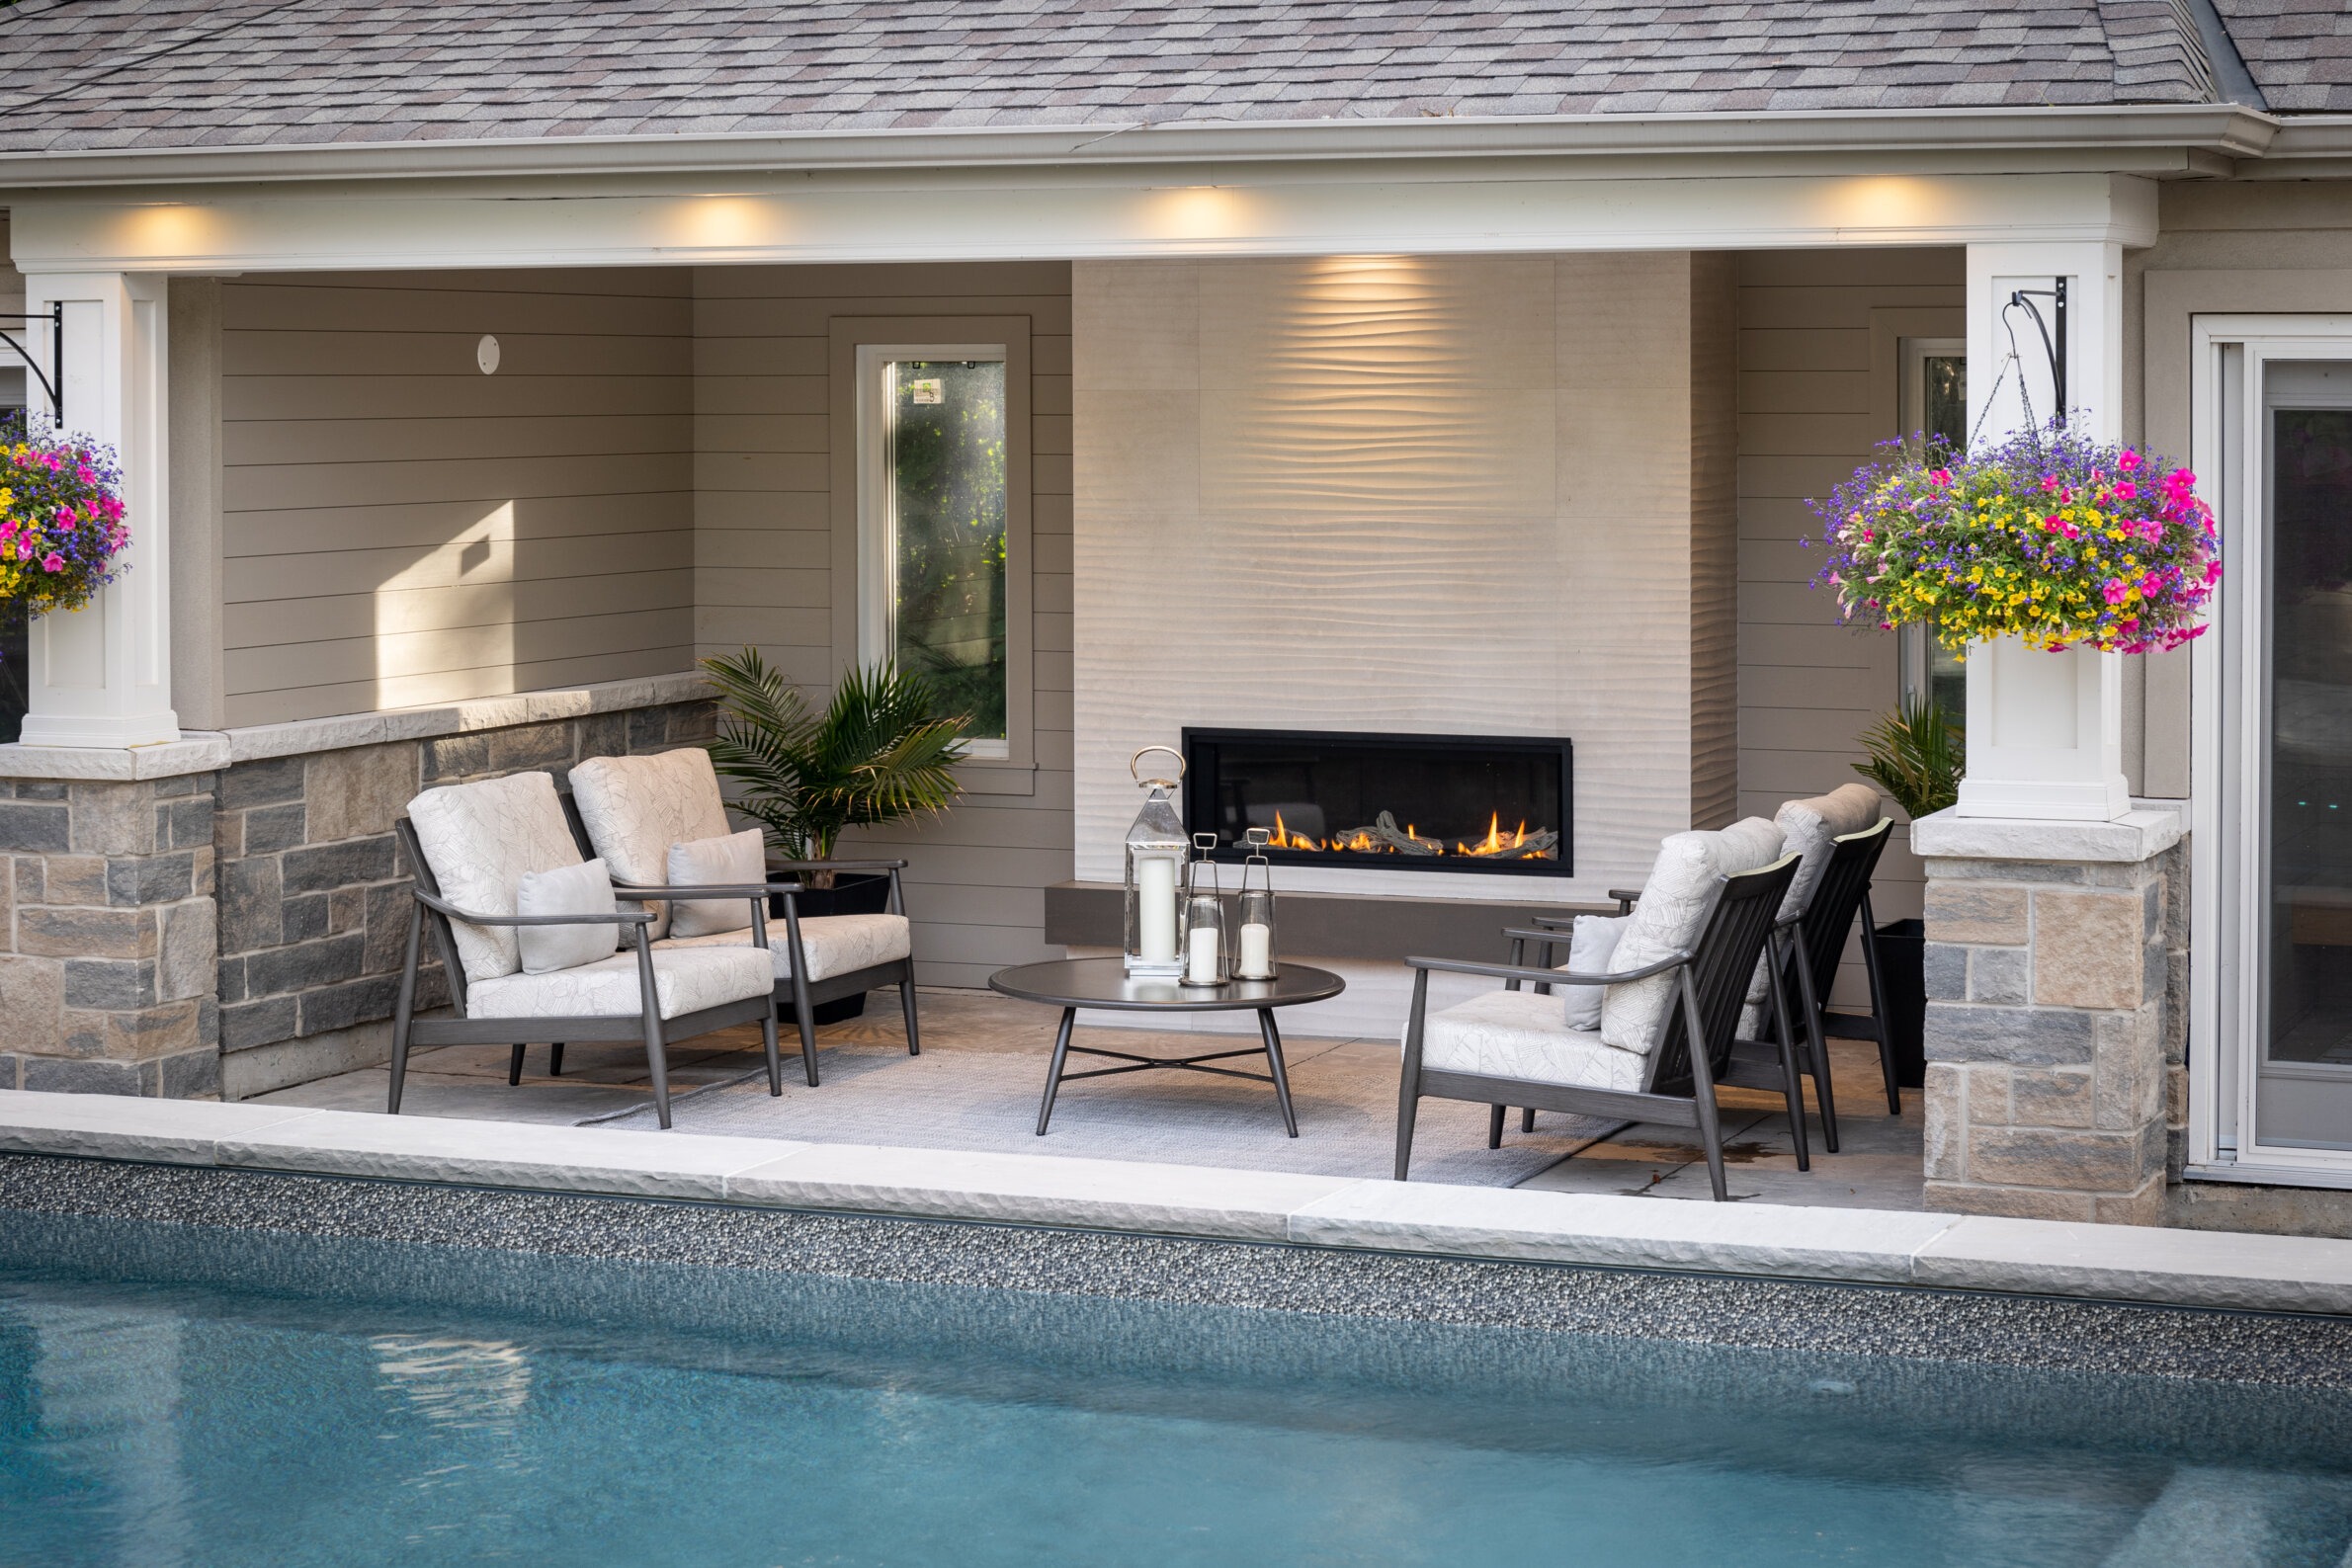 An outdoor patio with a fireplace, comfortable seating, and vibrant hanging flower baskets beside a swimming pool in a residential backyard setting.